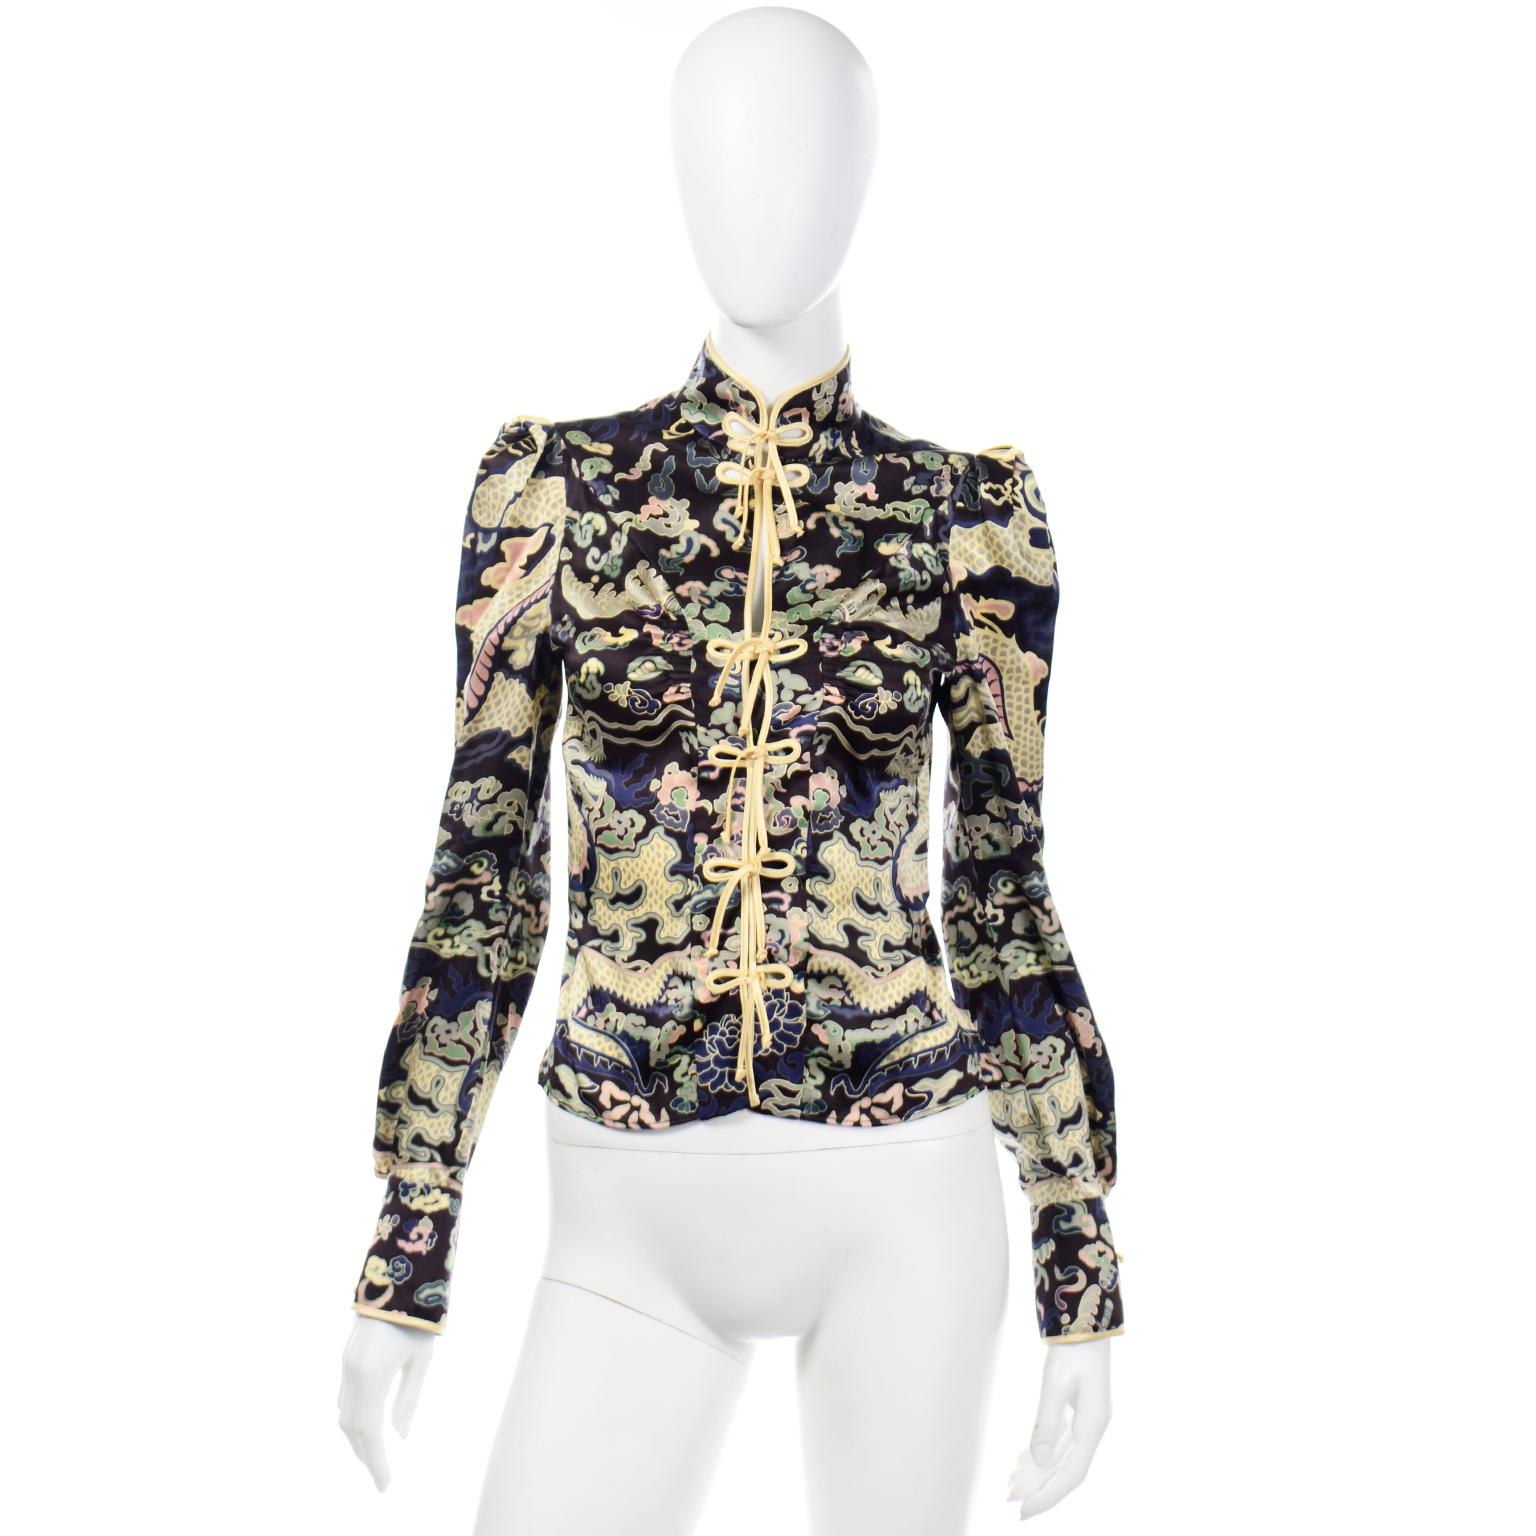 This is a beautiful YSL Rive Gauche Chinoiserie inspired silk printed blouse in various shades of blue, green, yellow and a touch of pink. This fabulous YSL top has a high neck and silk ribbon loops down the center front. The front of the blouse has